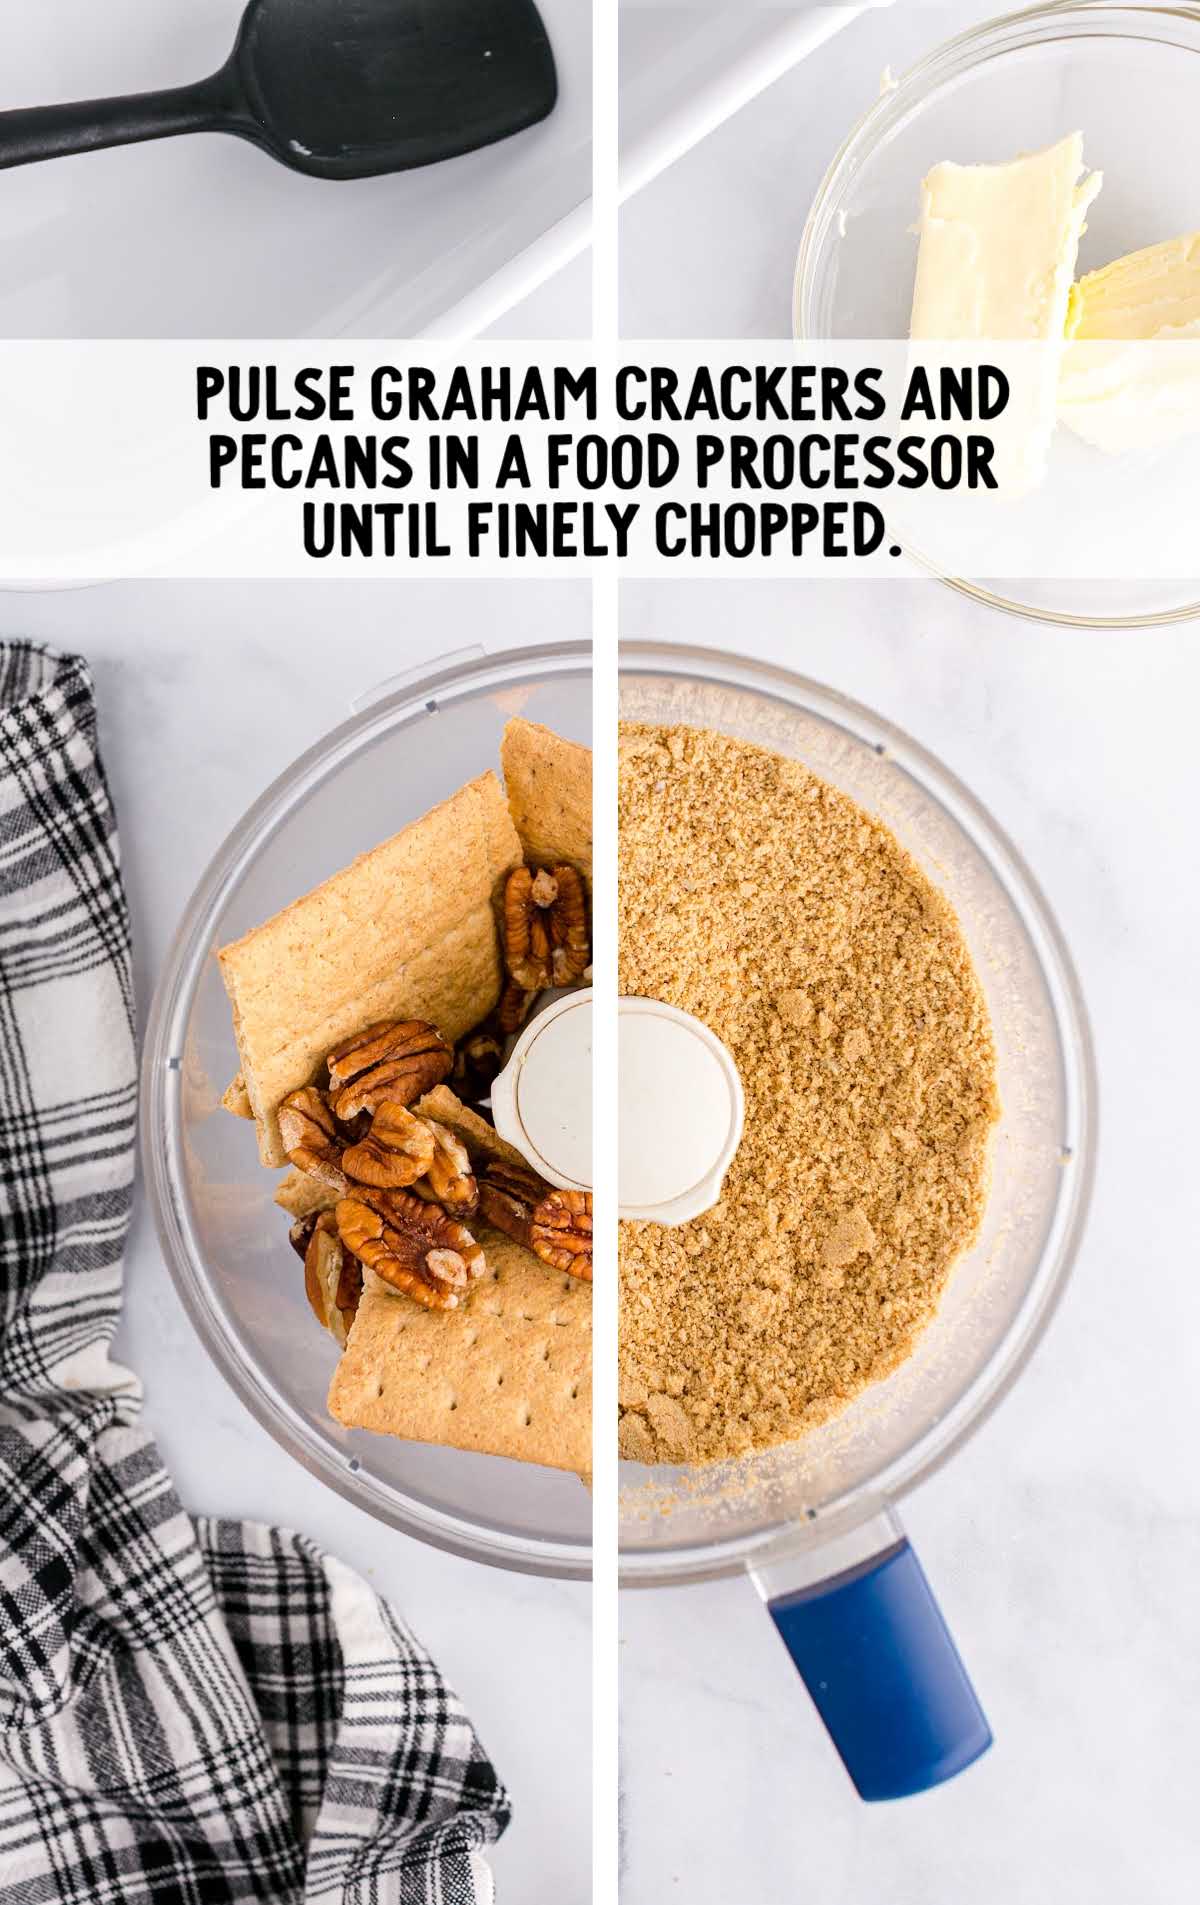 Graham crackers and pecans being pulsed in a food processor